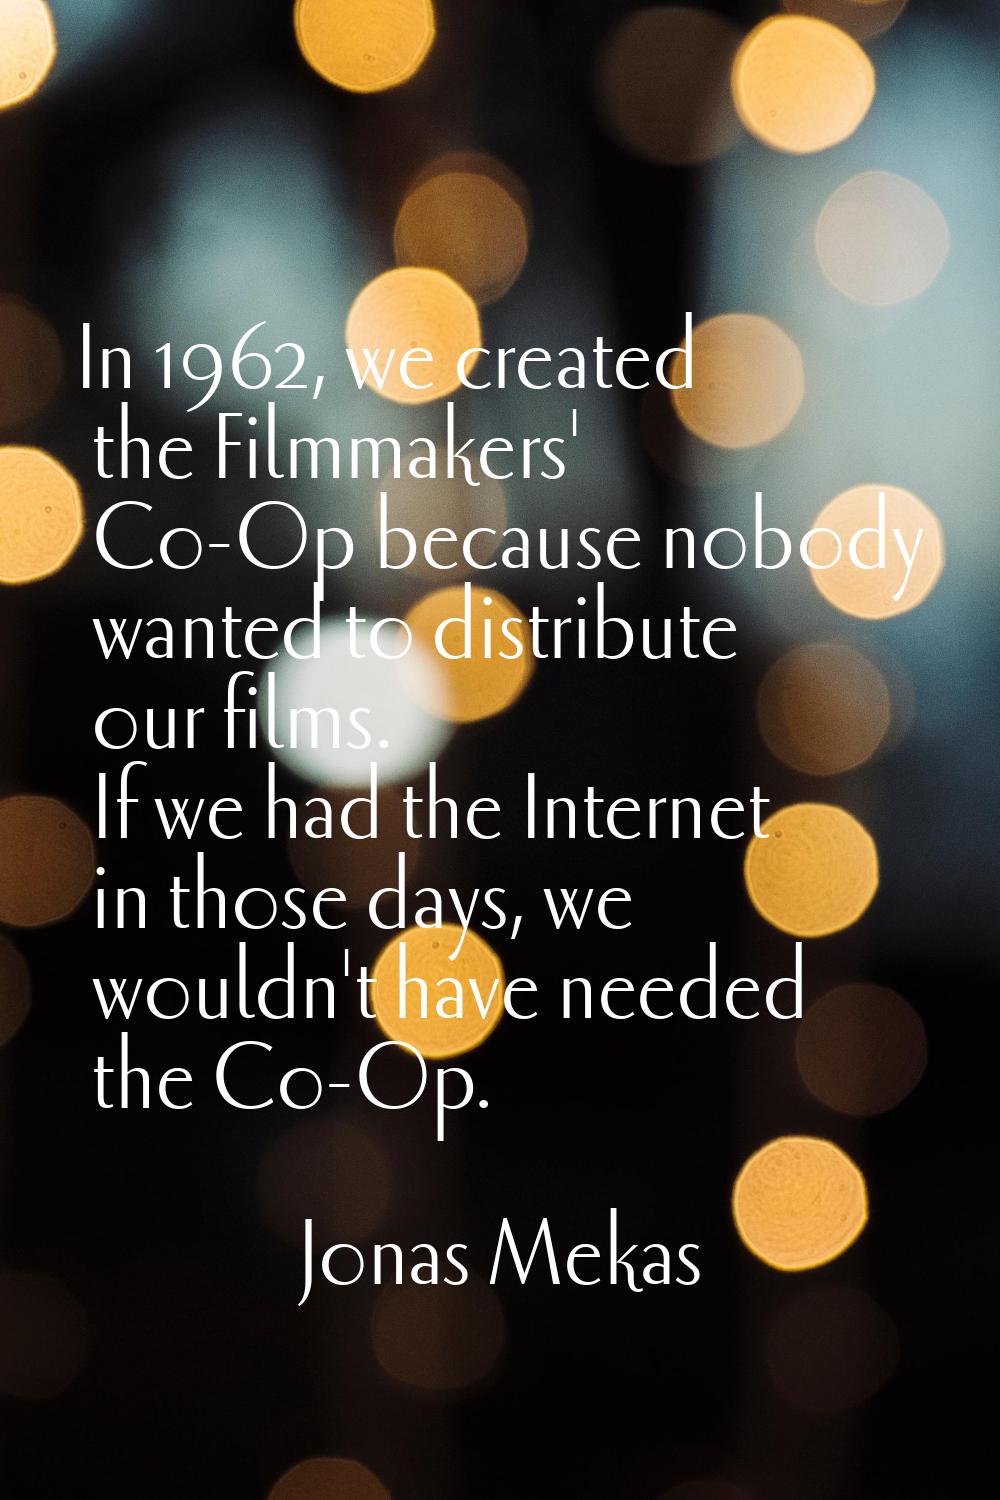 In 1962, we created the Filmmakers' Co-Op because nobody wanted to distribute our films. If we had 